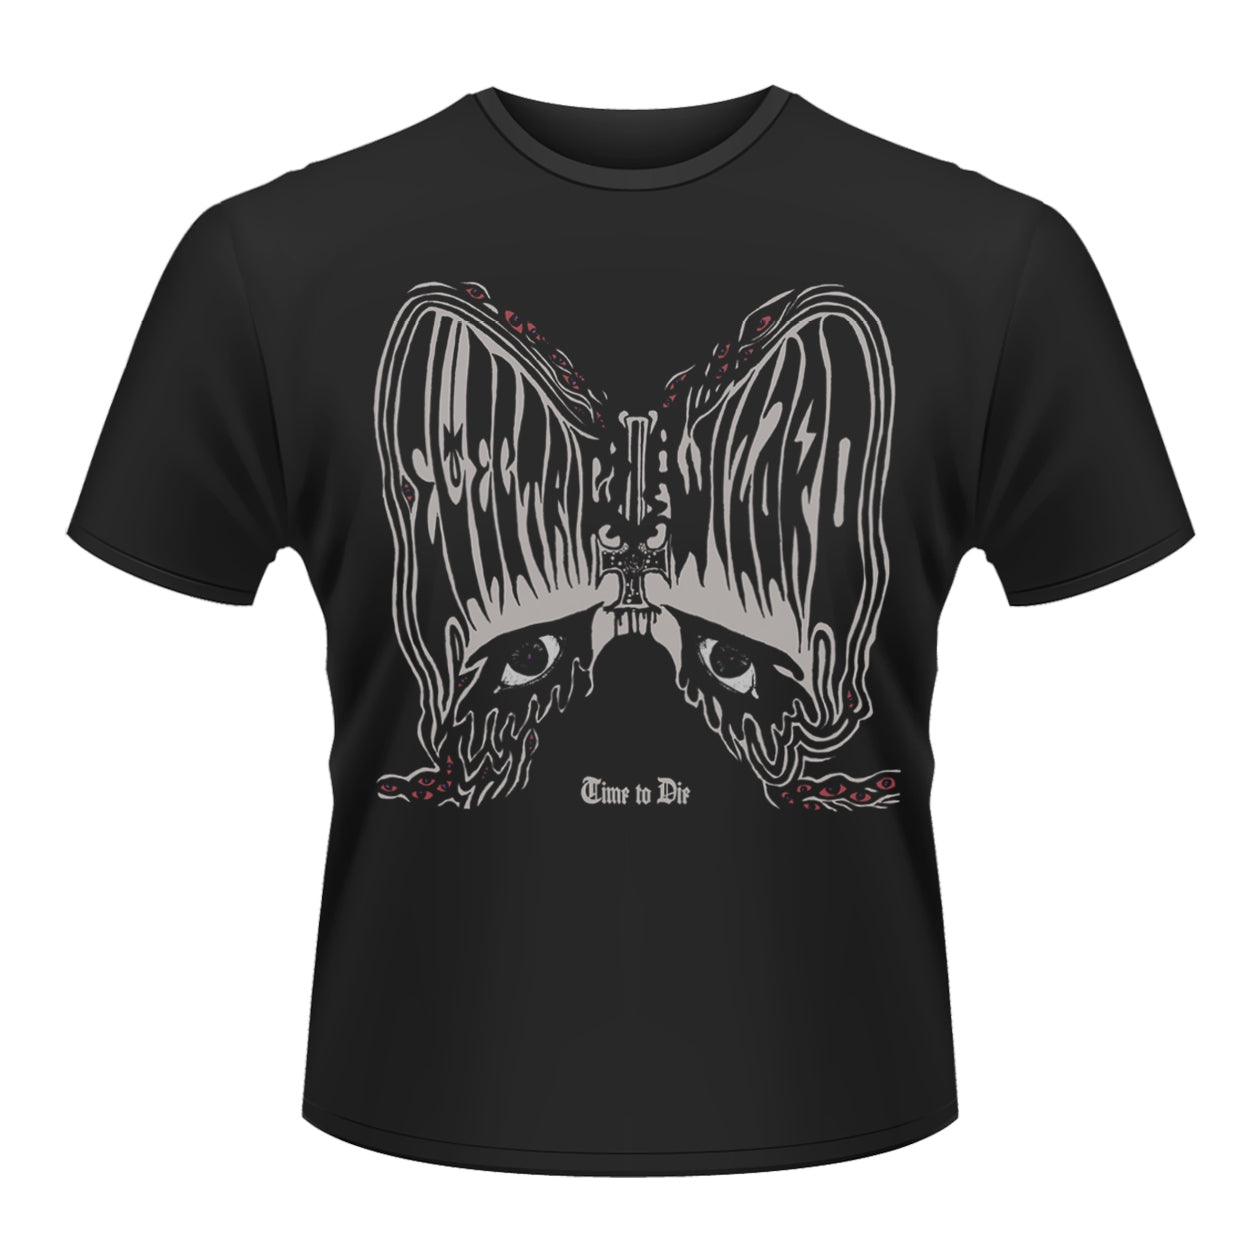 Electric Wizard "Time To Die" T shirt